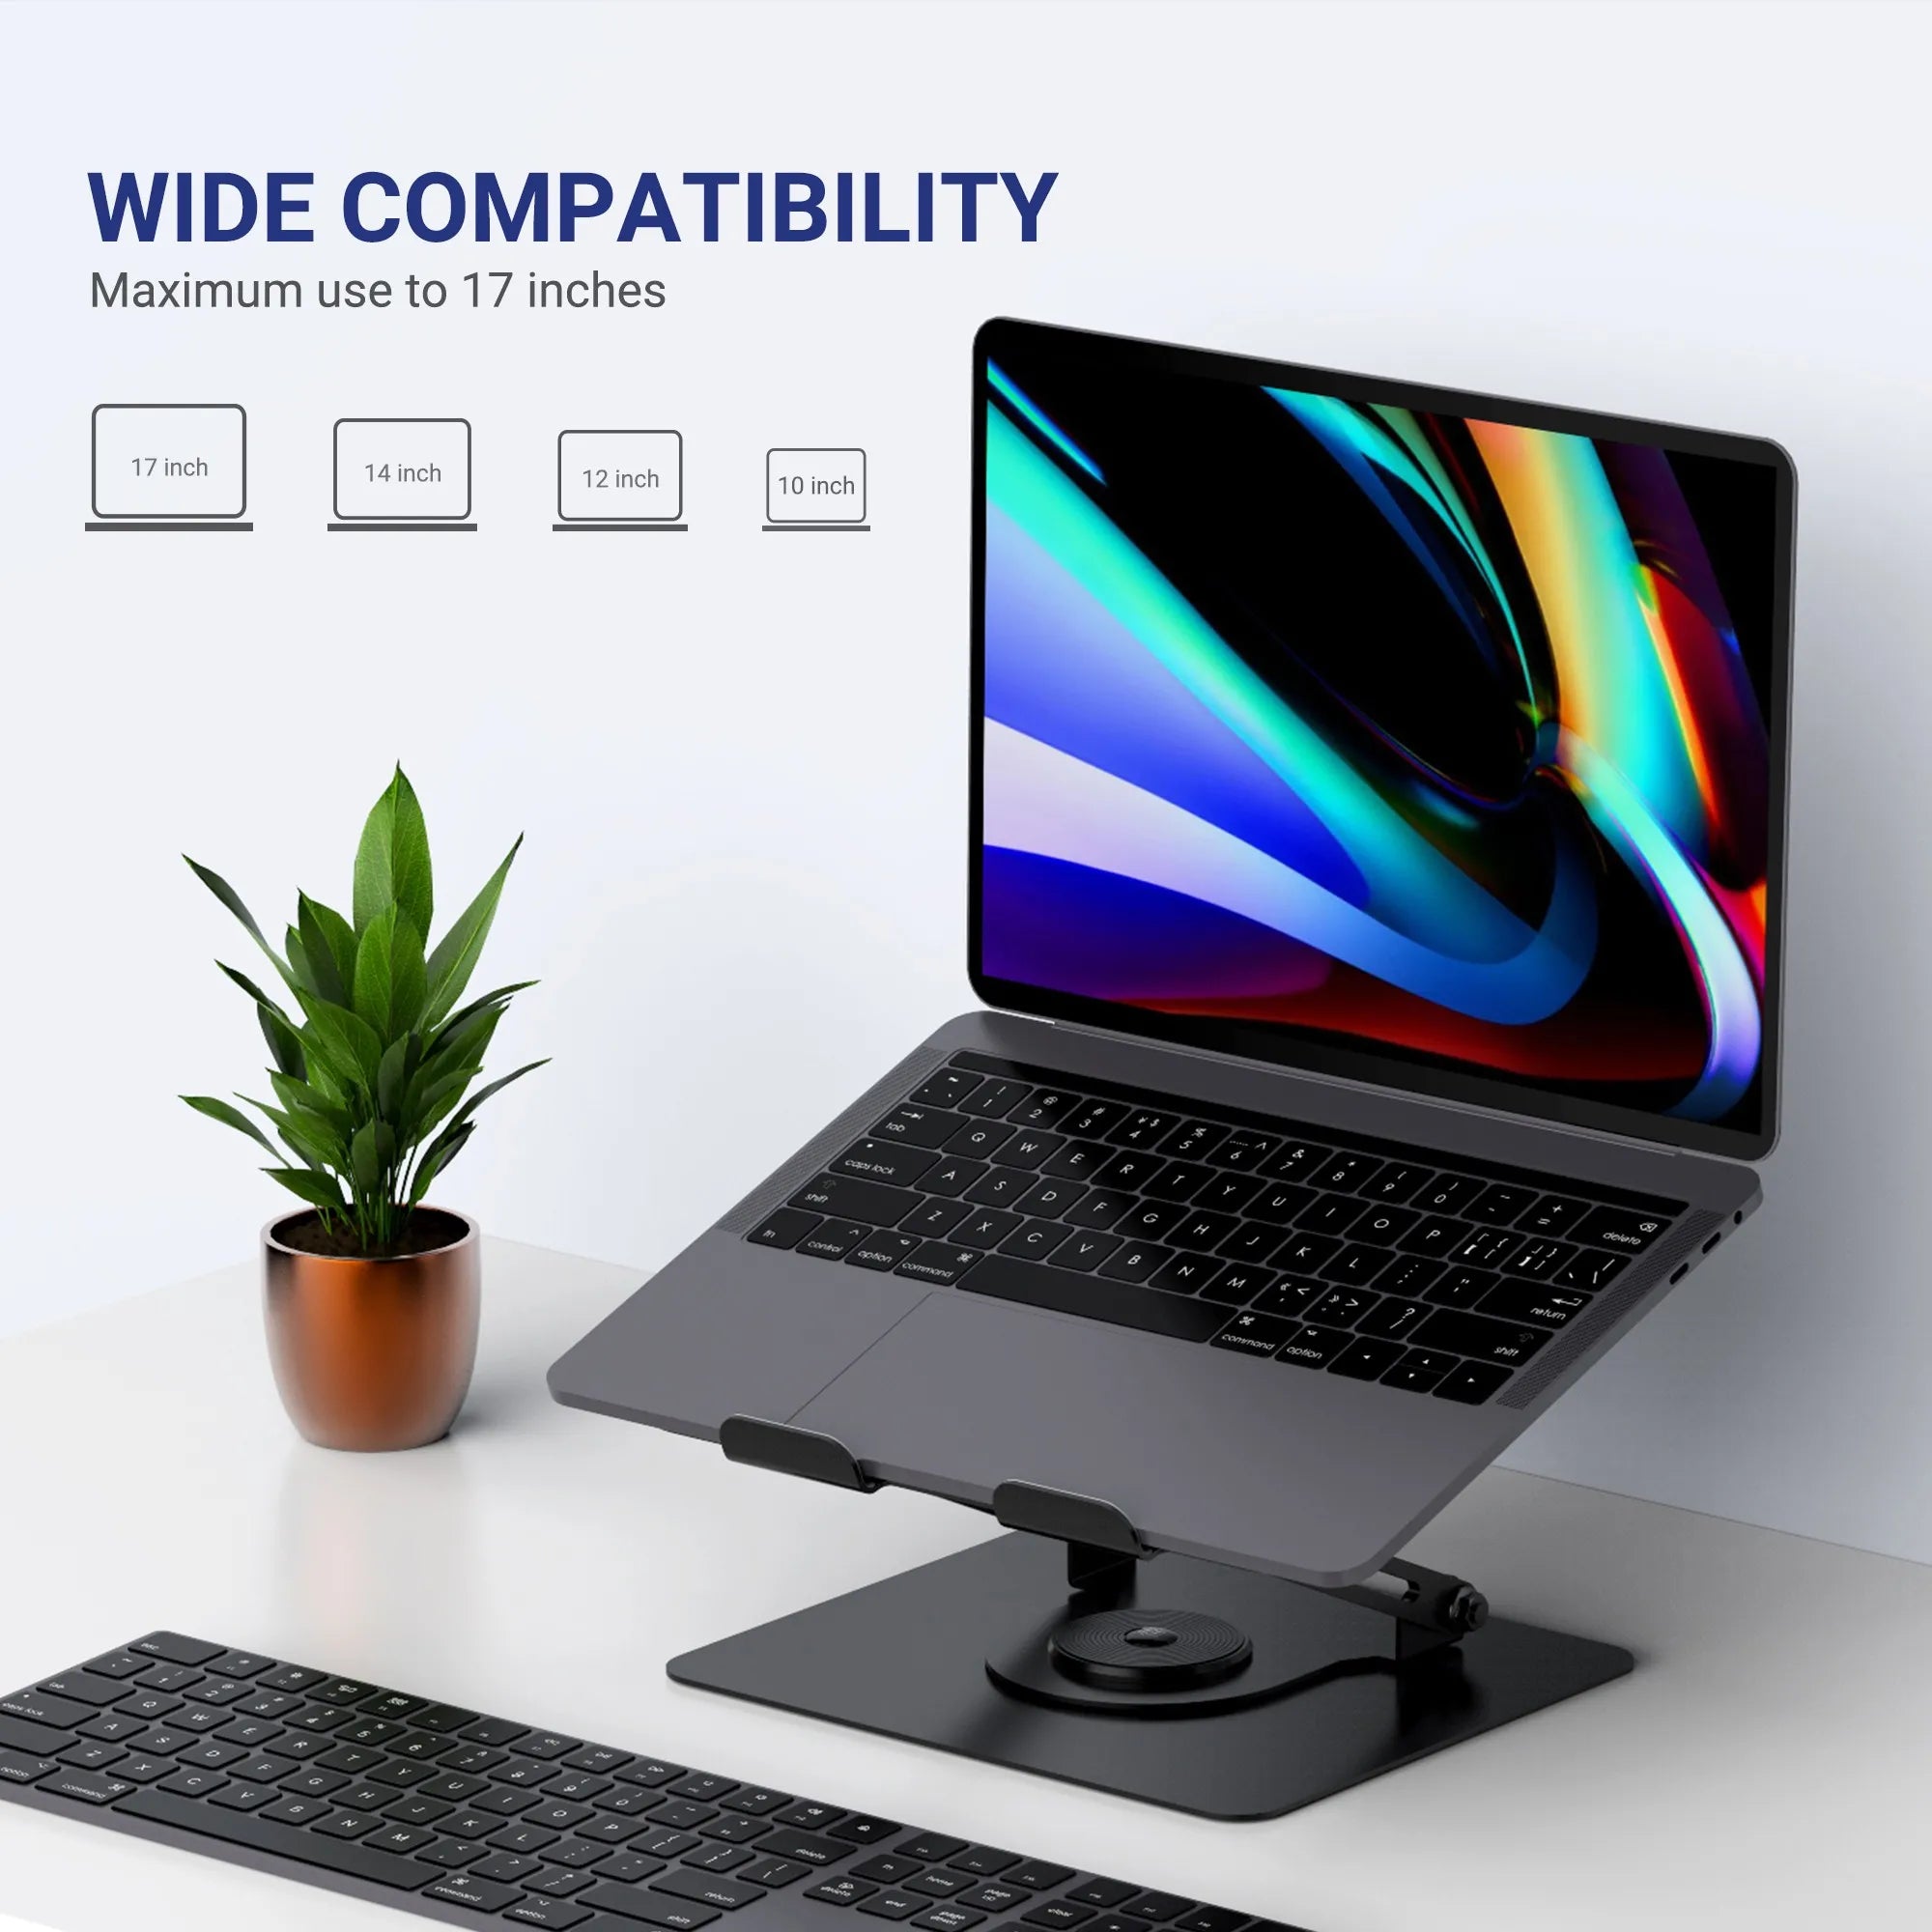 Wide compatibility laptop stand for up to 17-inch laptops, suitable for versatile desk setups in Singapore.